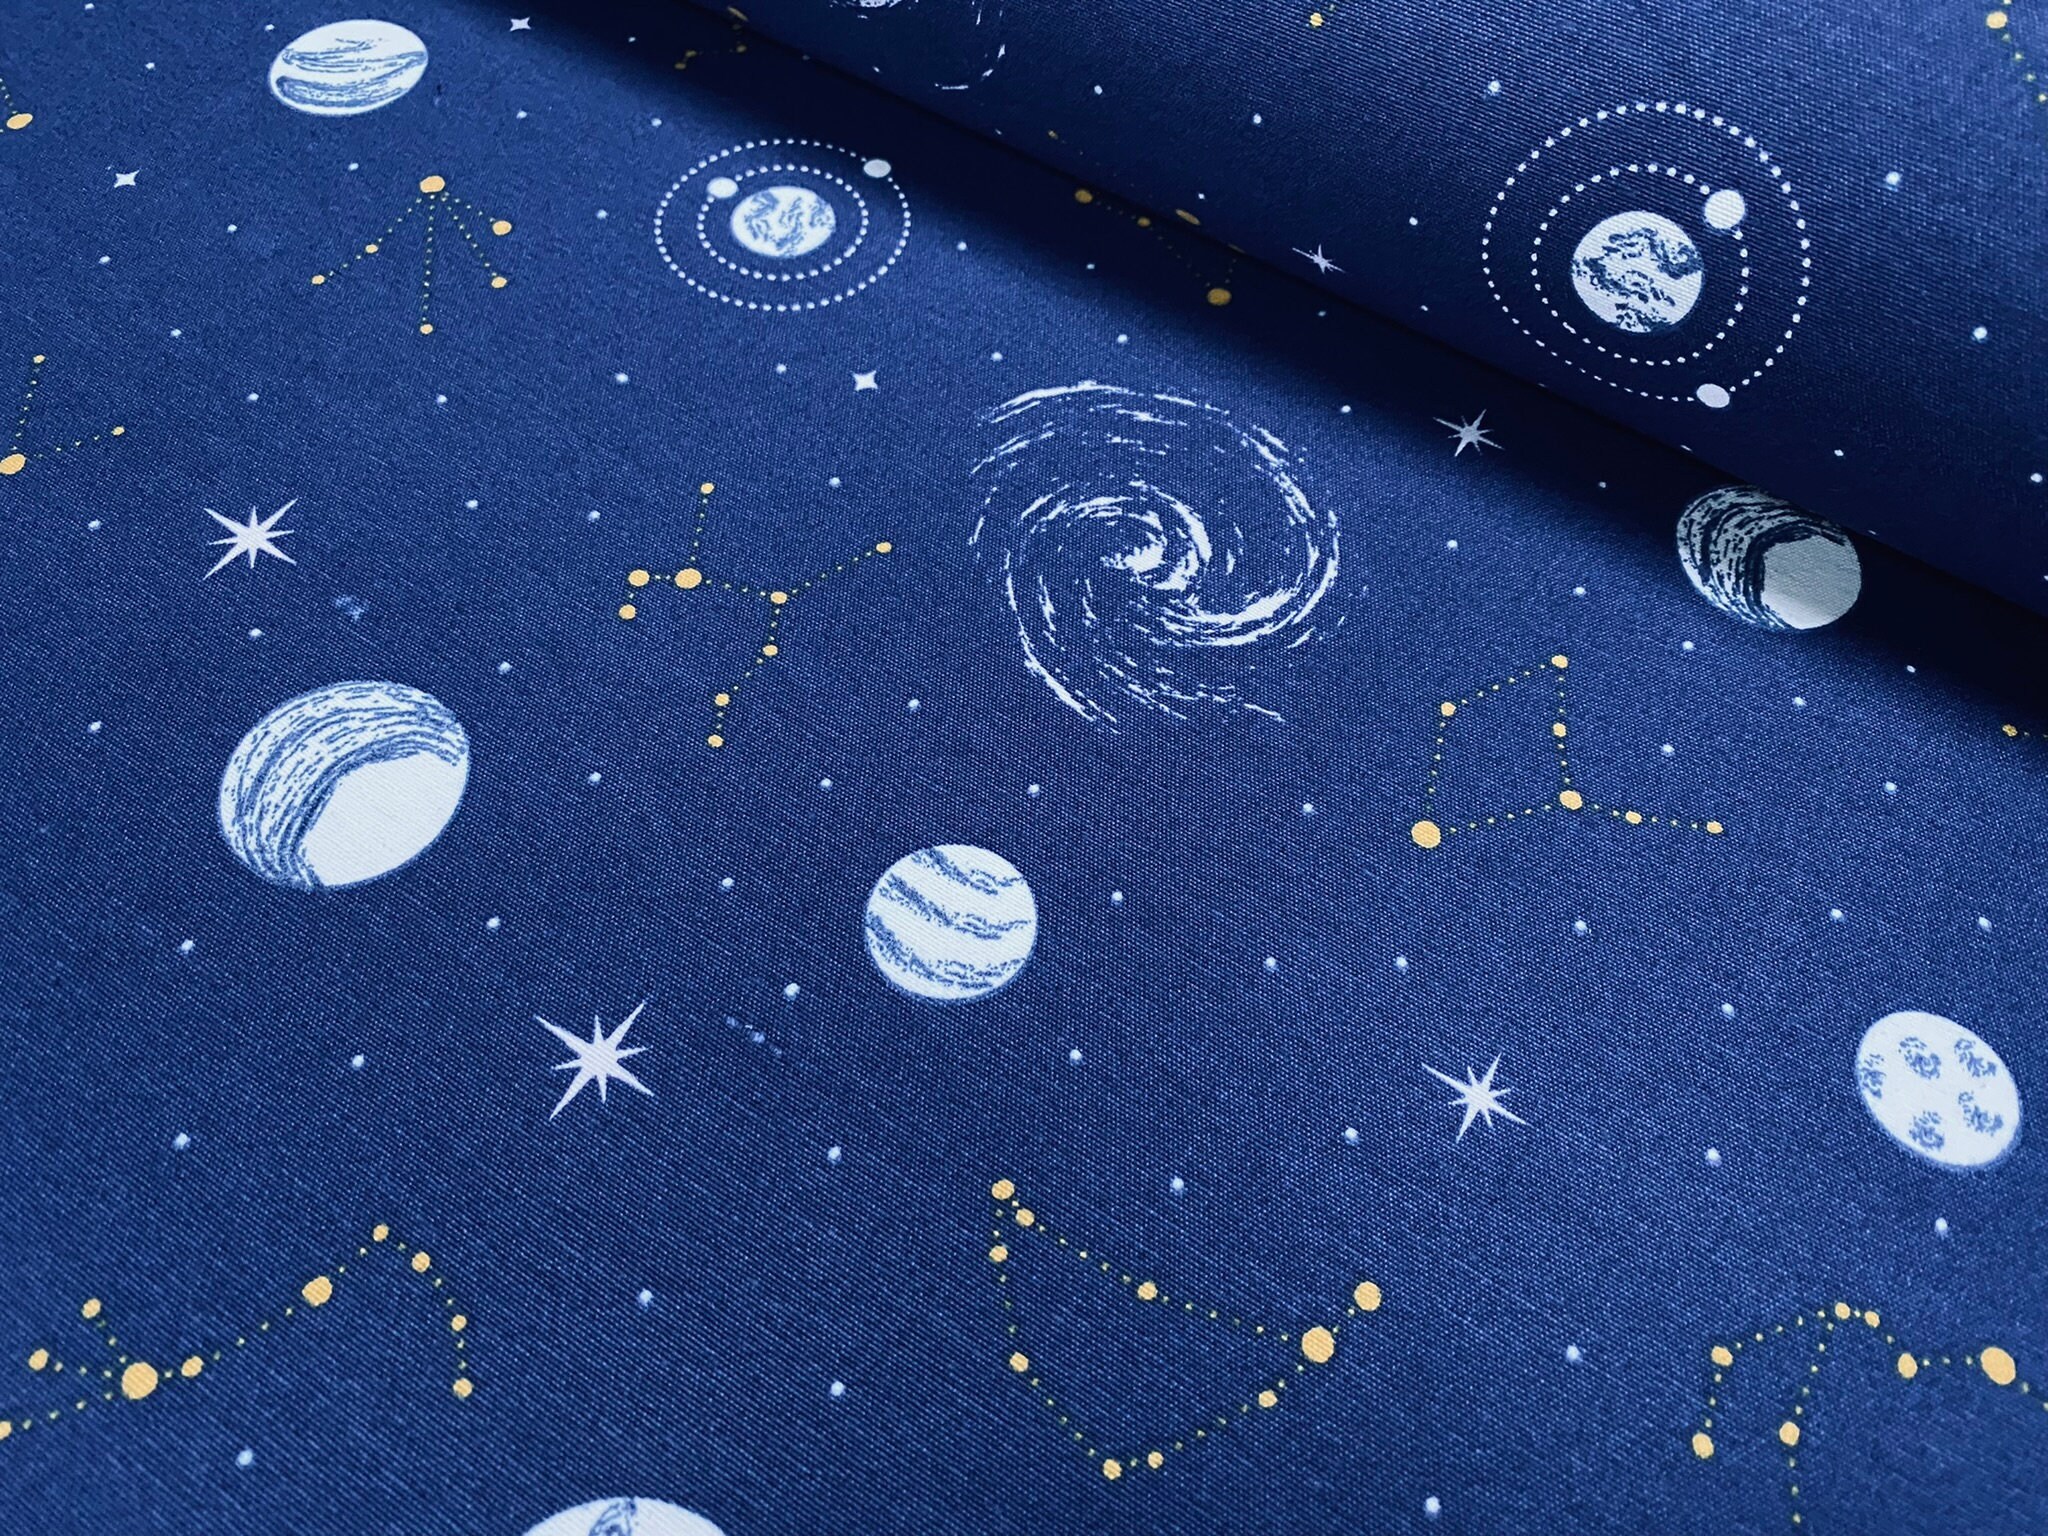 UV Glowing Planets Stars Fabric Moon Outer Space Galaxy Universe